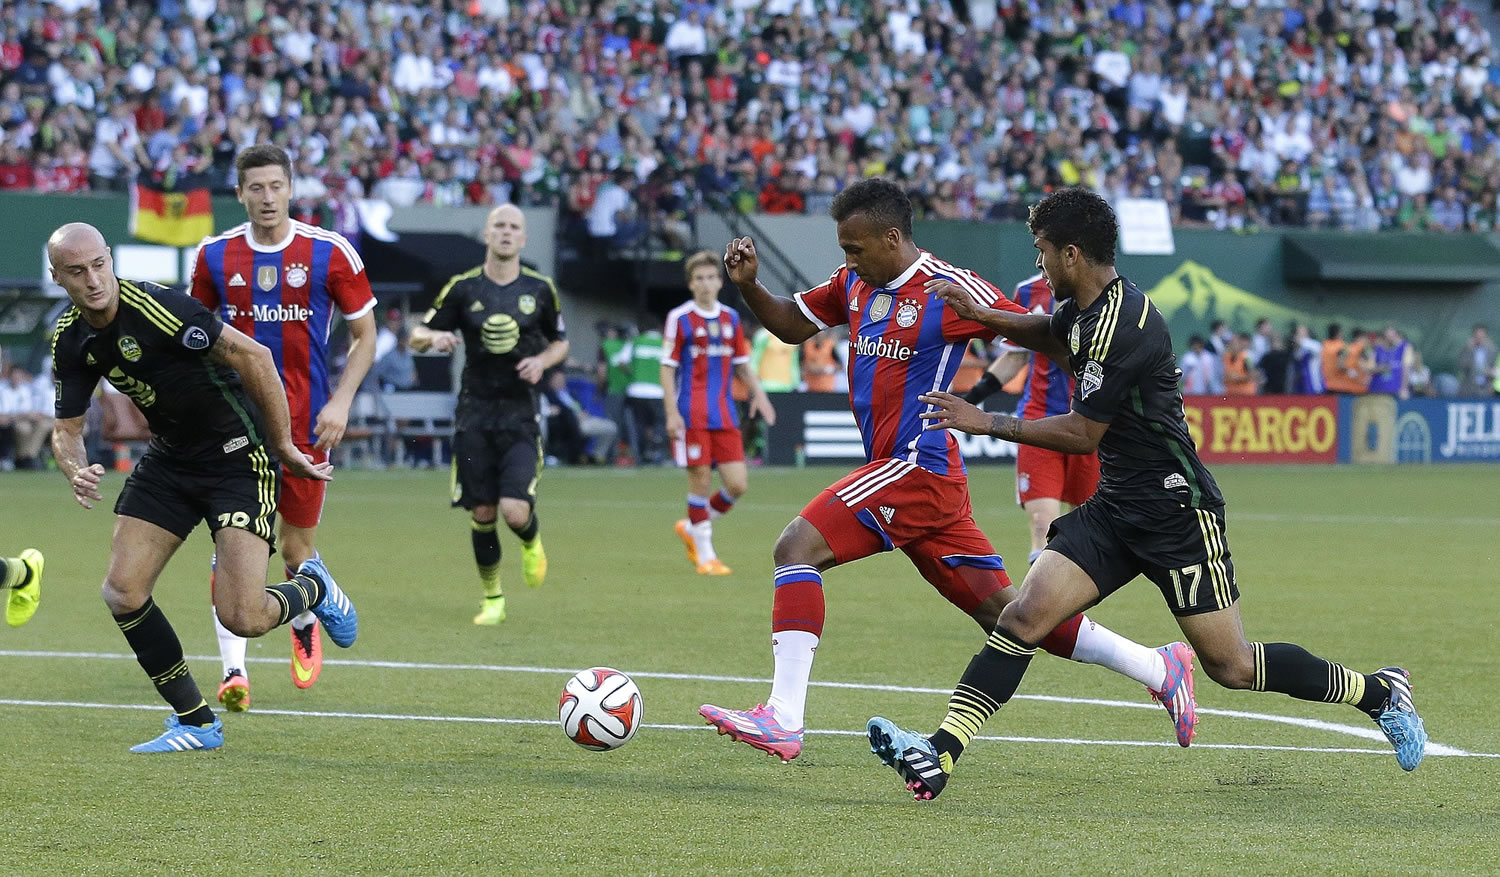 The MLS could benefit by bringing young American talent from overseas like Bayern Munich's Julian Green.